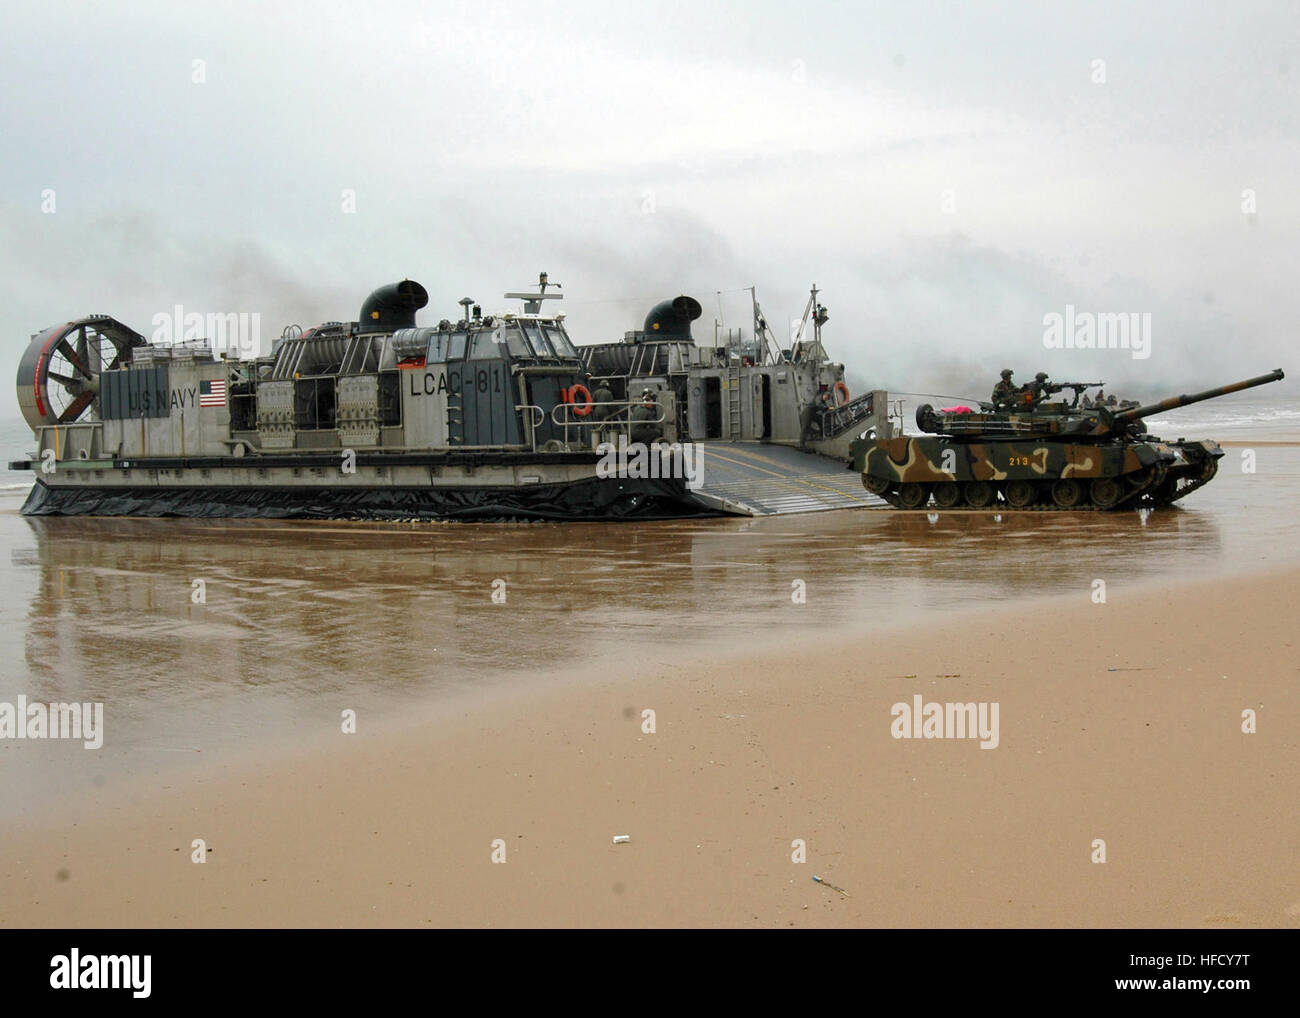 070329-L-6710M-012   SOUTH CHINA SEA (March 29, 2007) - A Republic of Korea tank exits a Landing Craft Air Cushion (LCAC) in preparation in support of Foal Eagle 07. Foal Eagle is an annually scheduled exercise involving forces from the U.S. and the Republic of Korea (ROK) to improve combat readiness through interoperability. The amphibious assault ship USS Tortuga and the Essex Amphibious Ready Group (ESXARG) are the Navy's only forward deployed multi-purpose amphibious assault ship and is the flagship for the Essex Amphibious Ready Group (ARG). U.S. Navy photo by Mass Communication Specialis Stock Photo